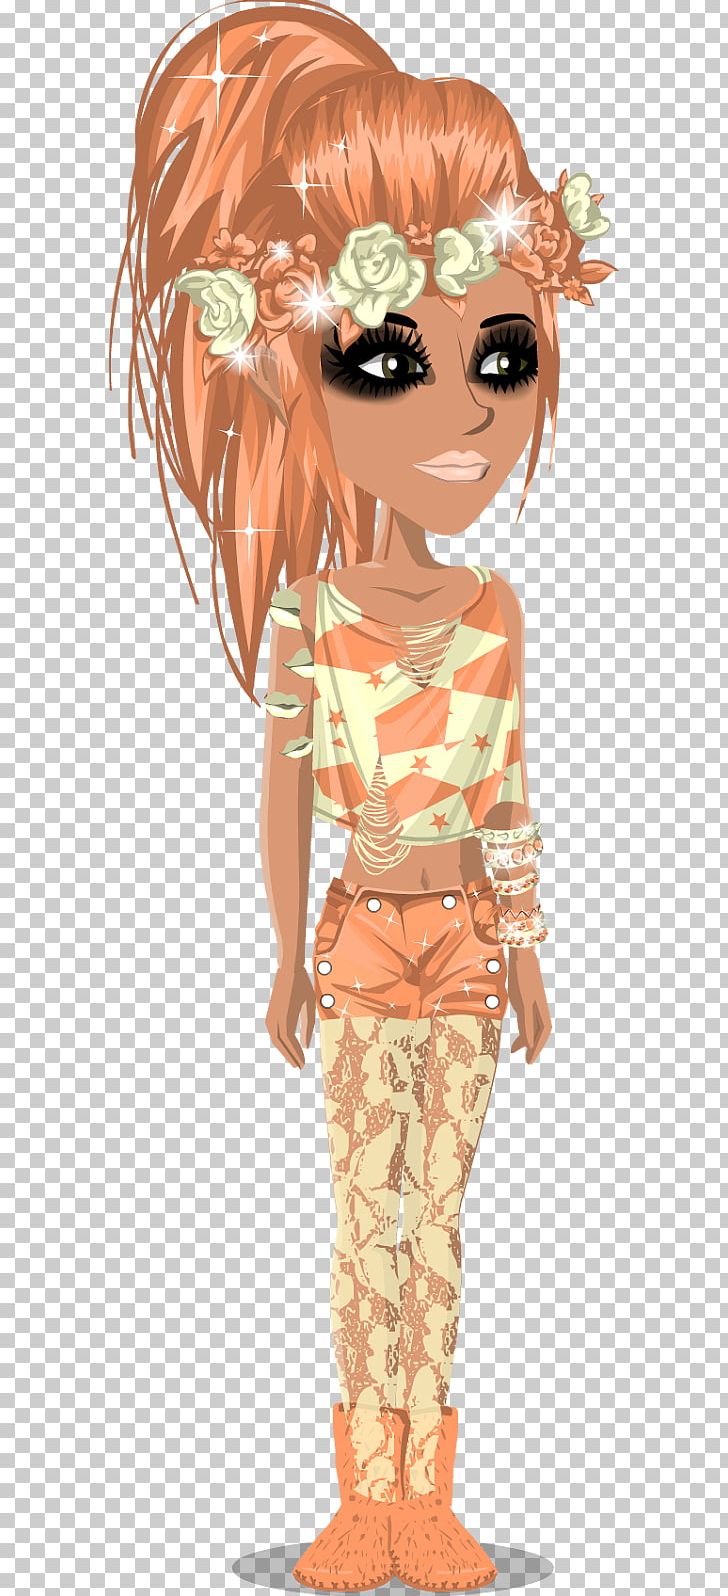 MovieStarPlanet Clothing PNG, Clipart, Anime, Art, Brown Hair, Cartoon, Clothing Free PNG Download